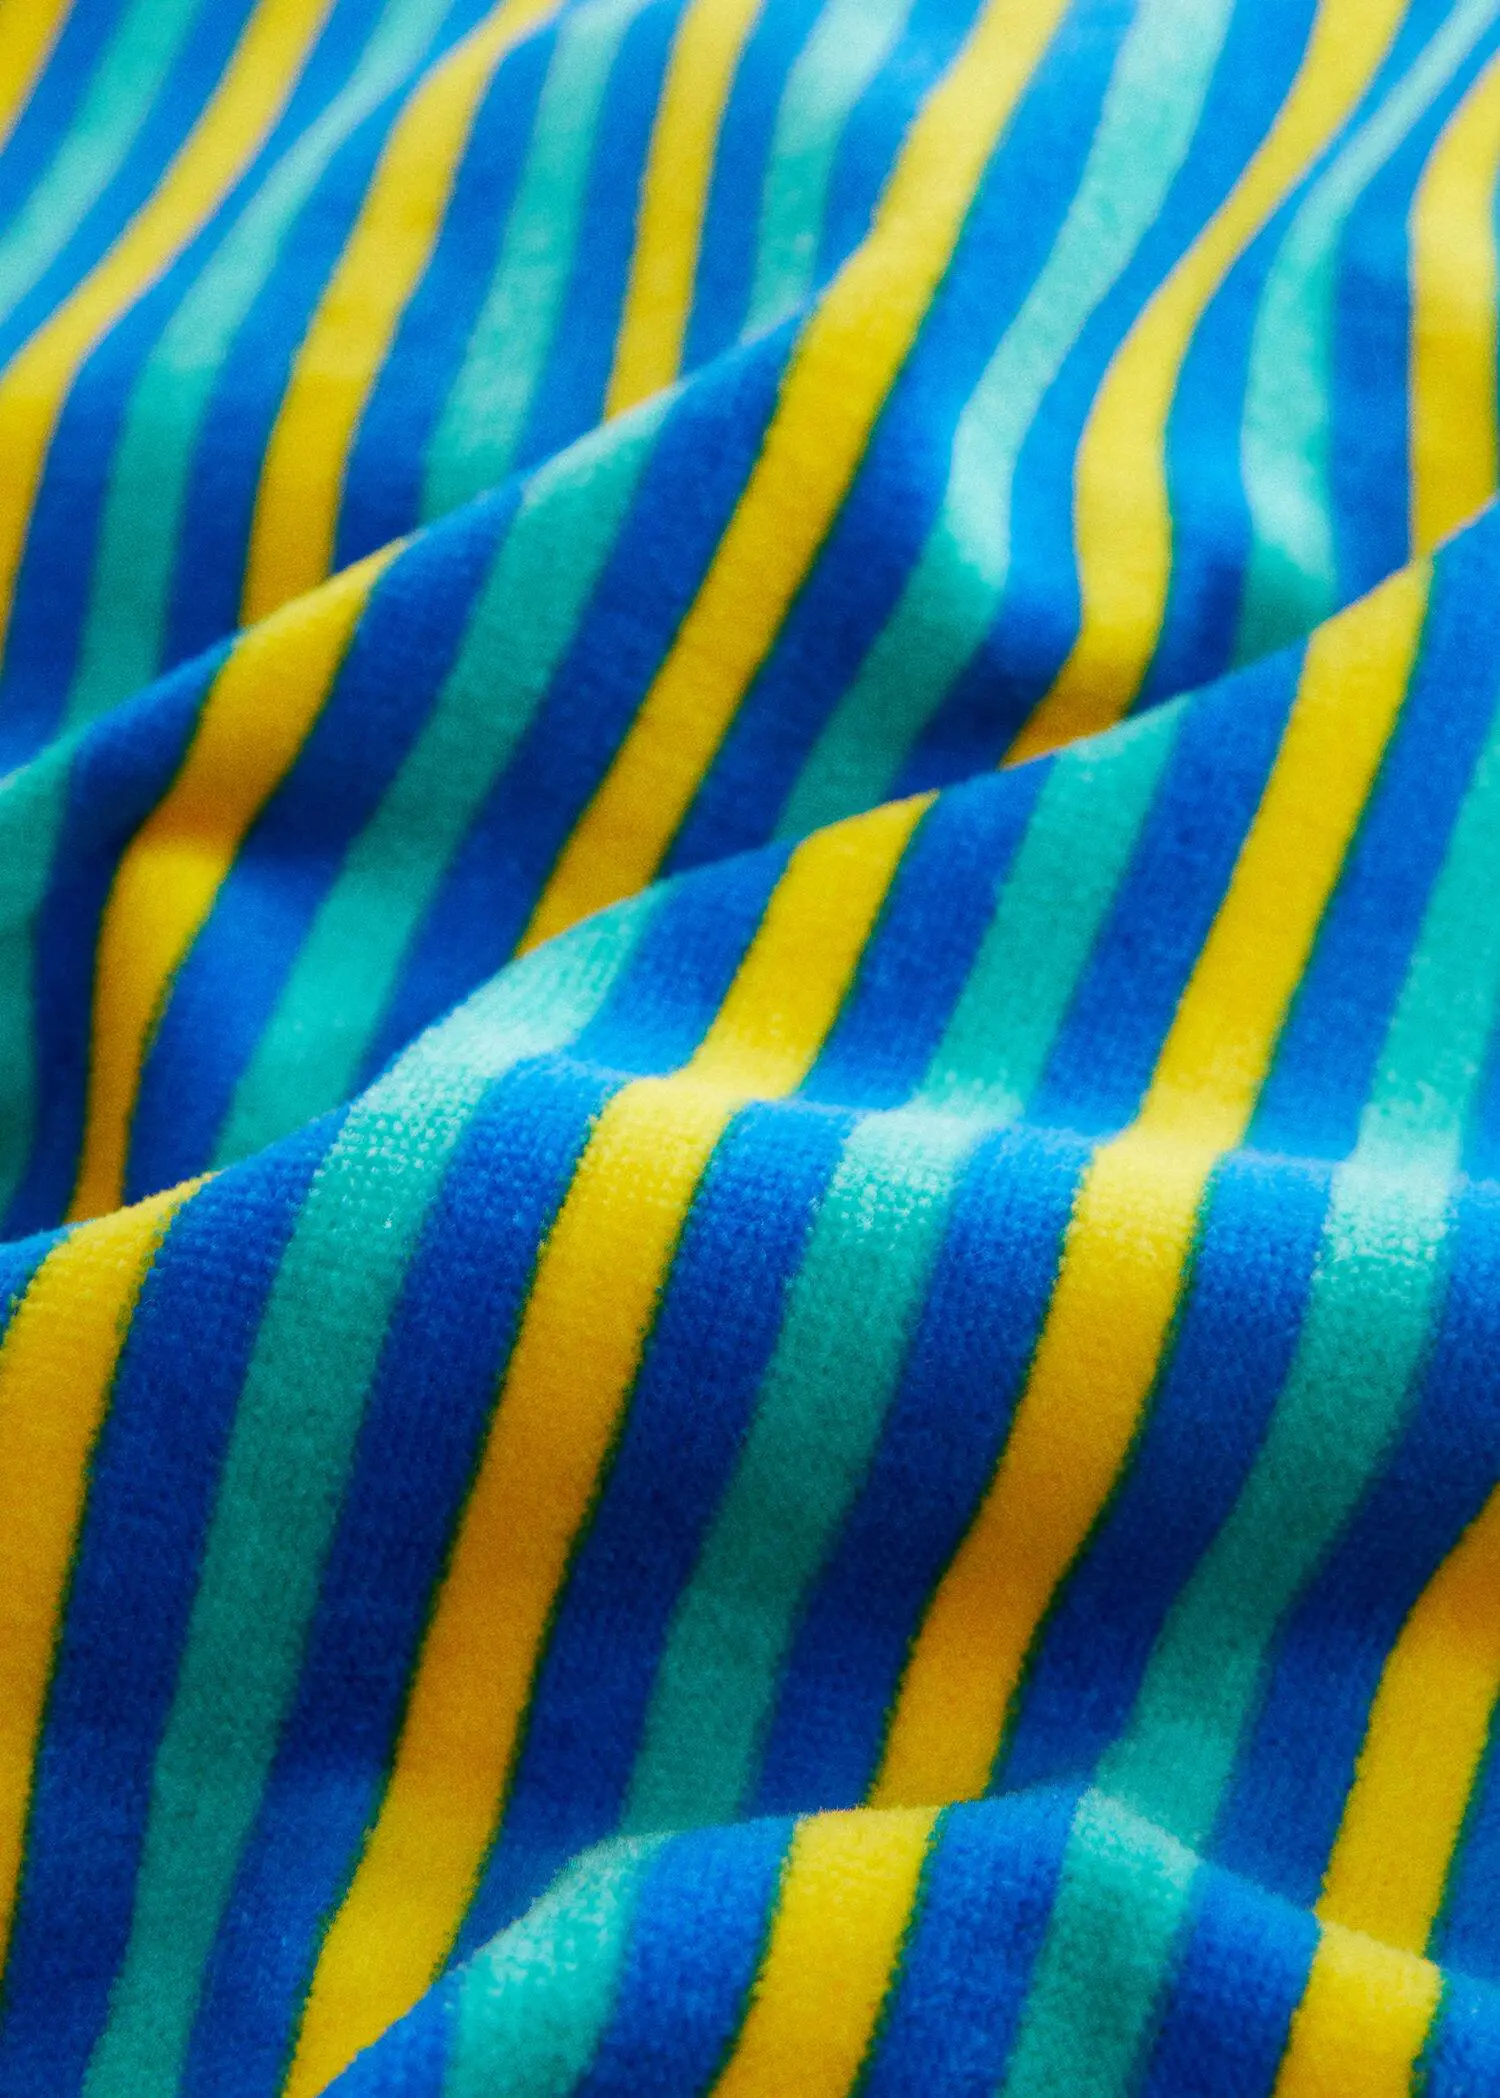 Mango Multi-colored striped beach towel. a close-up view of a blue, yellow, and green striped fabric. 